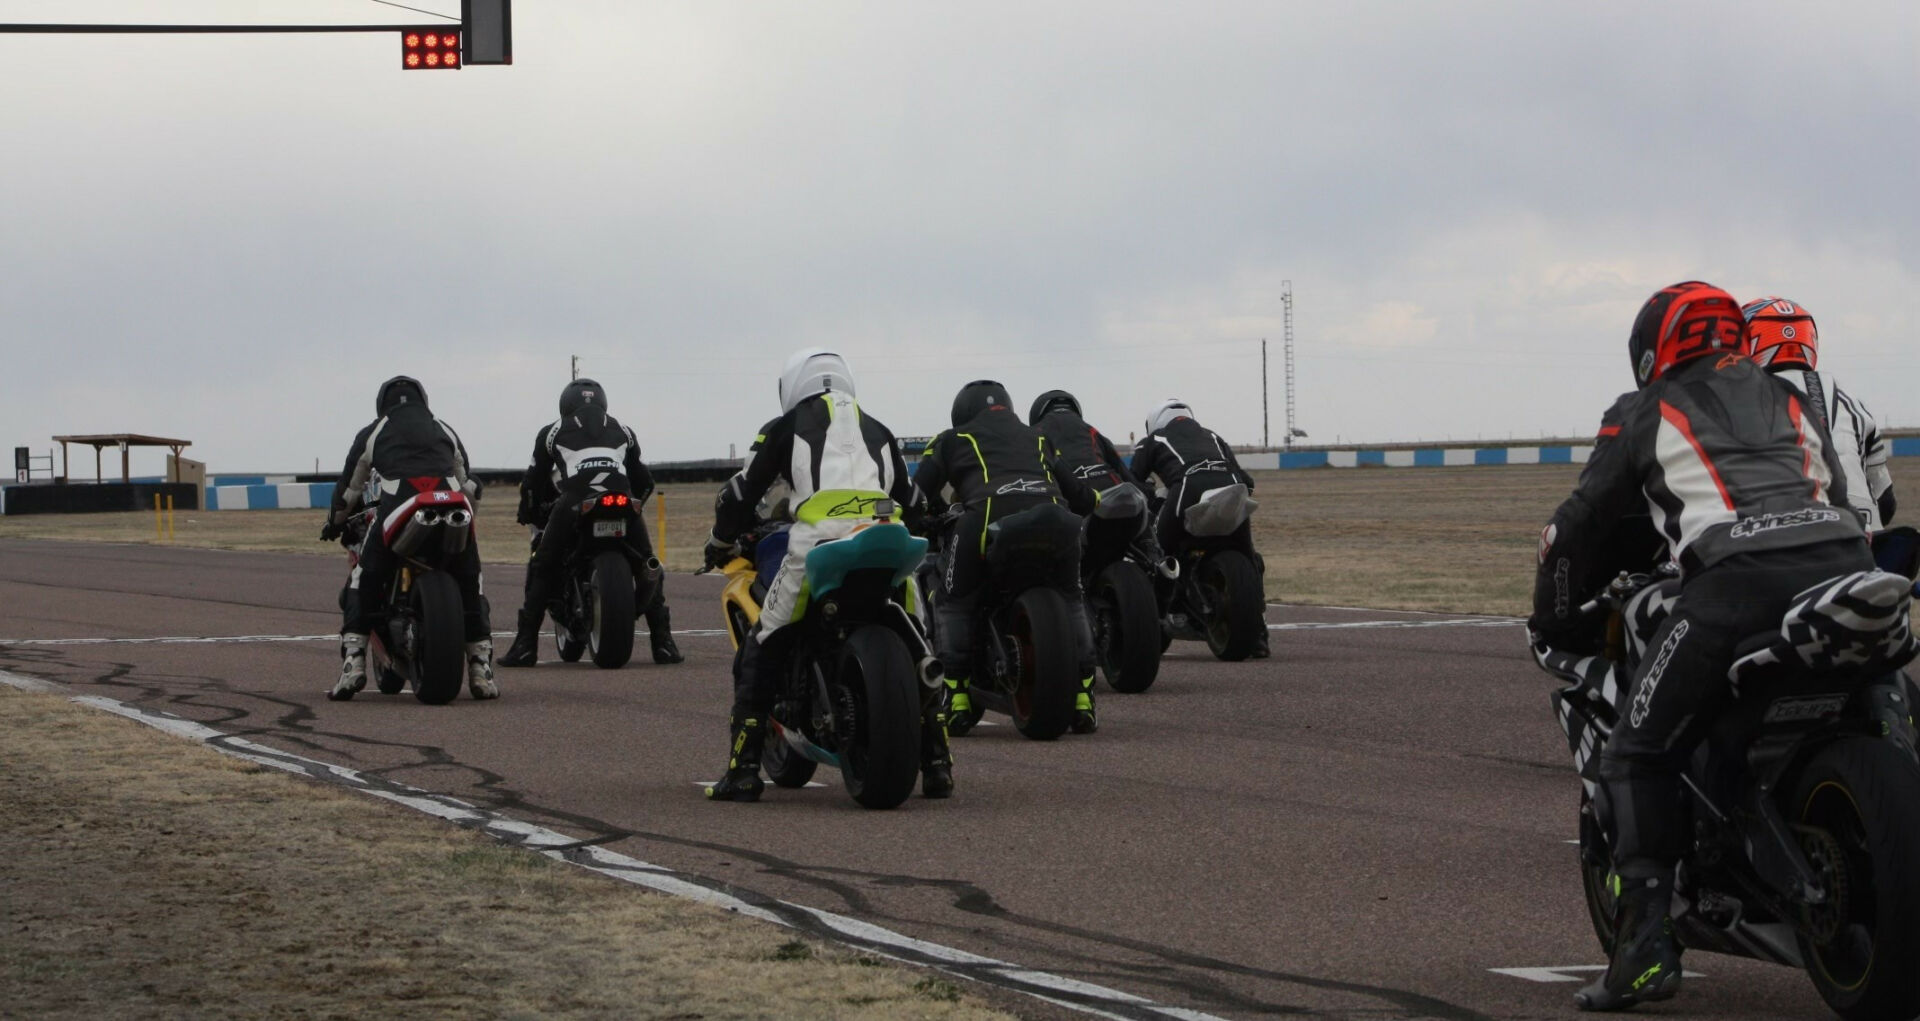 Ready to start a mock race, MRA New Racer School students wait for the red lights to go out at High Plains Raceway. Photo by Noel Ross, courtesy MRA.